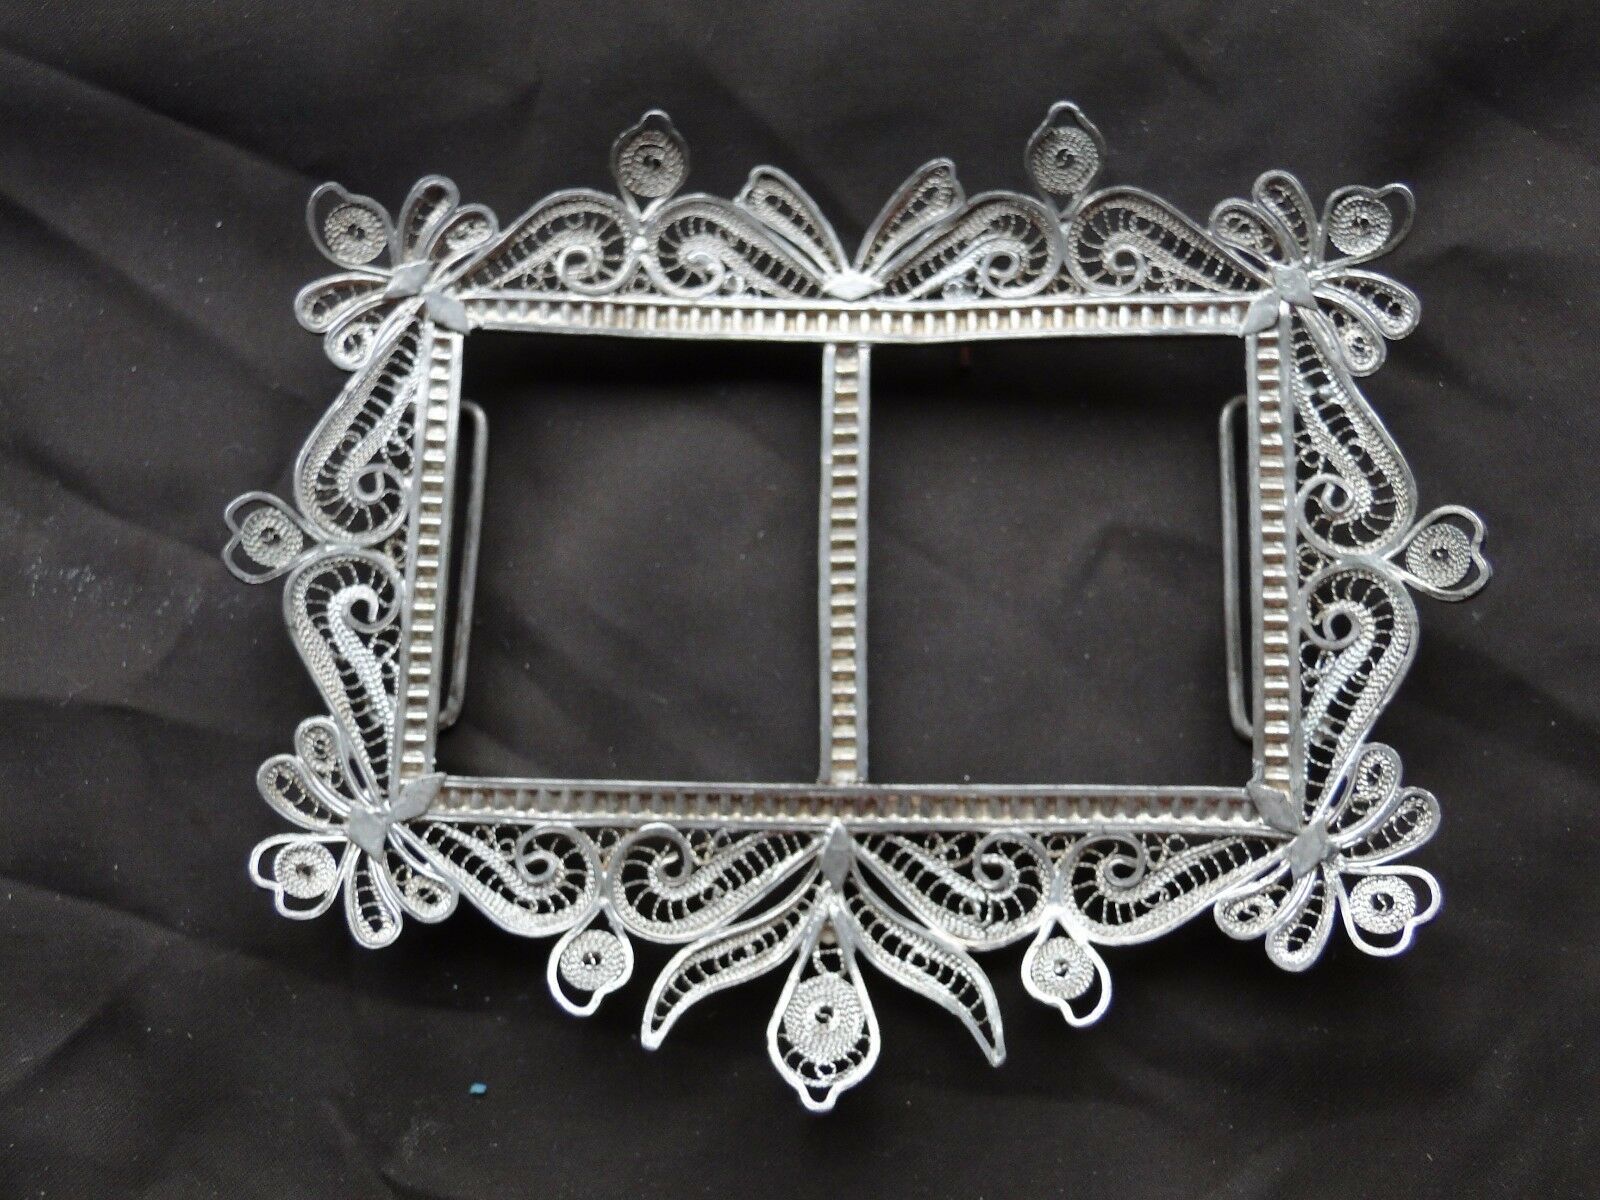 Miniature Filagree Frame Middle Eastern Sterling Silver Top Quality & Beautiful